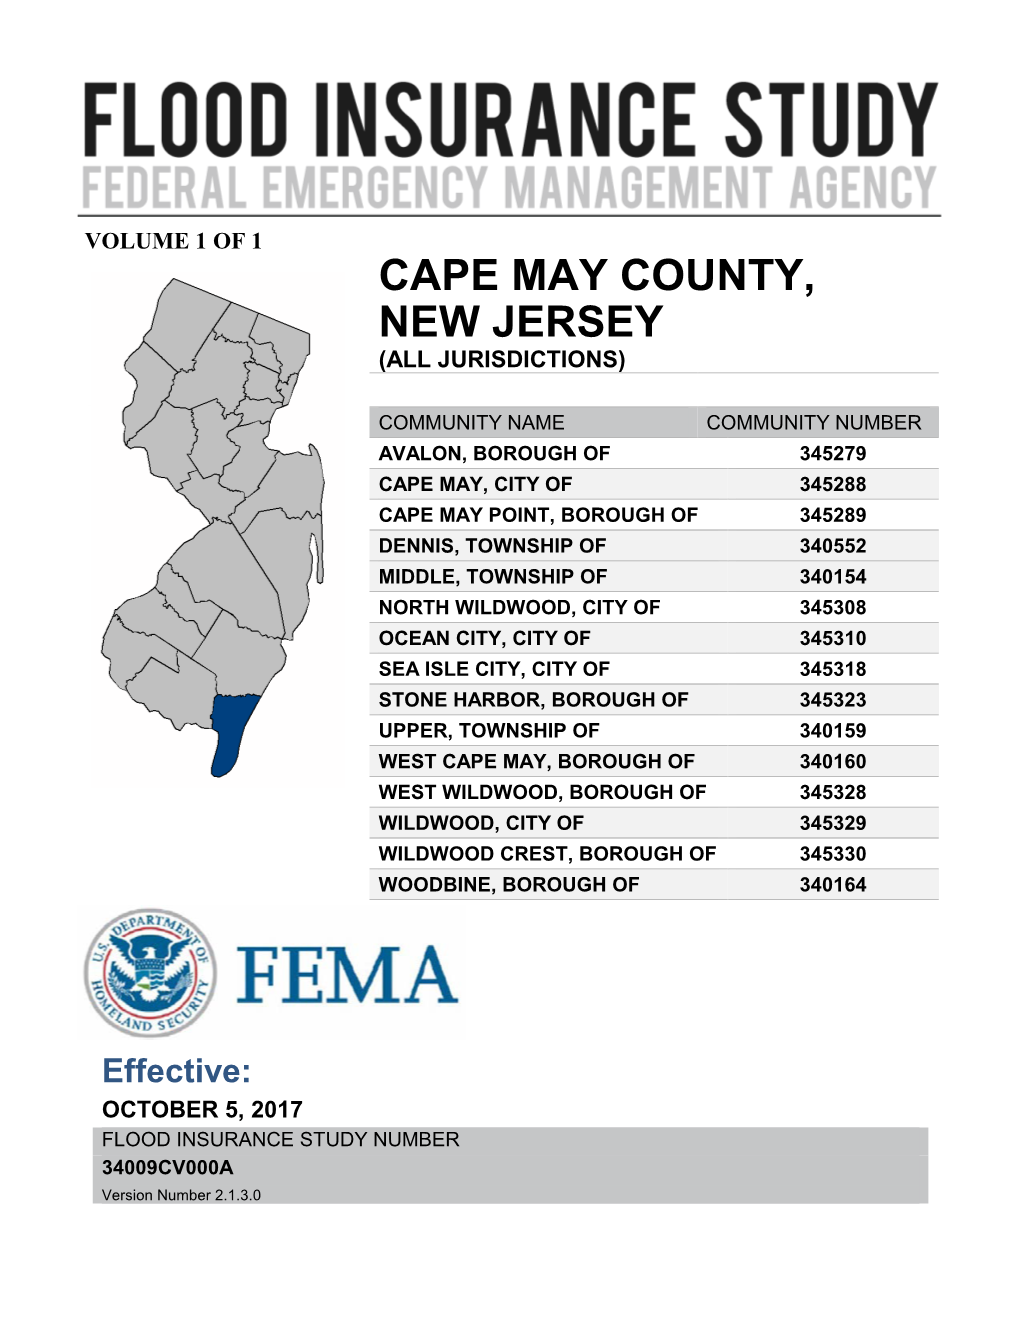 Cape May County, New Jersey (All Jurisdictions)